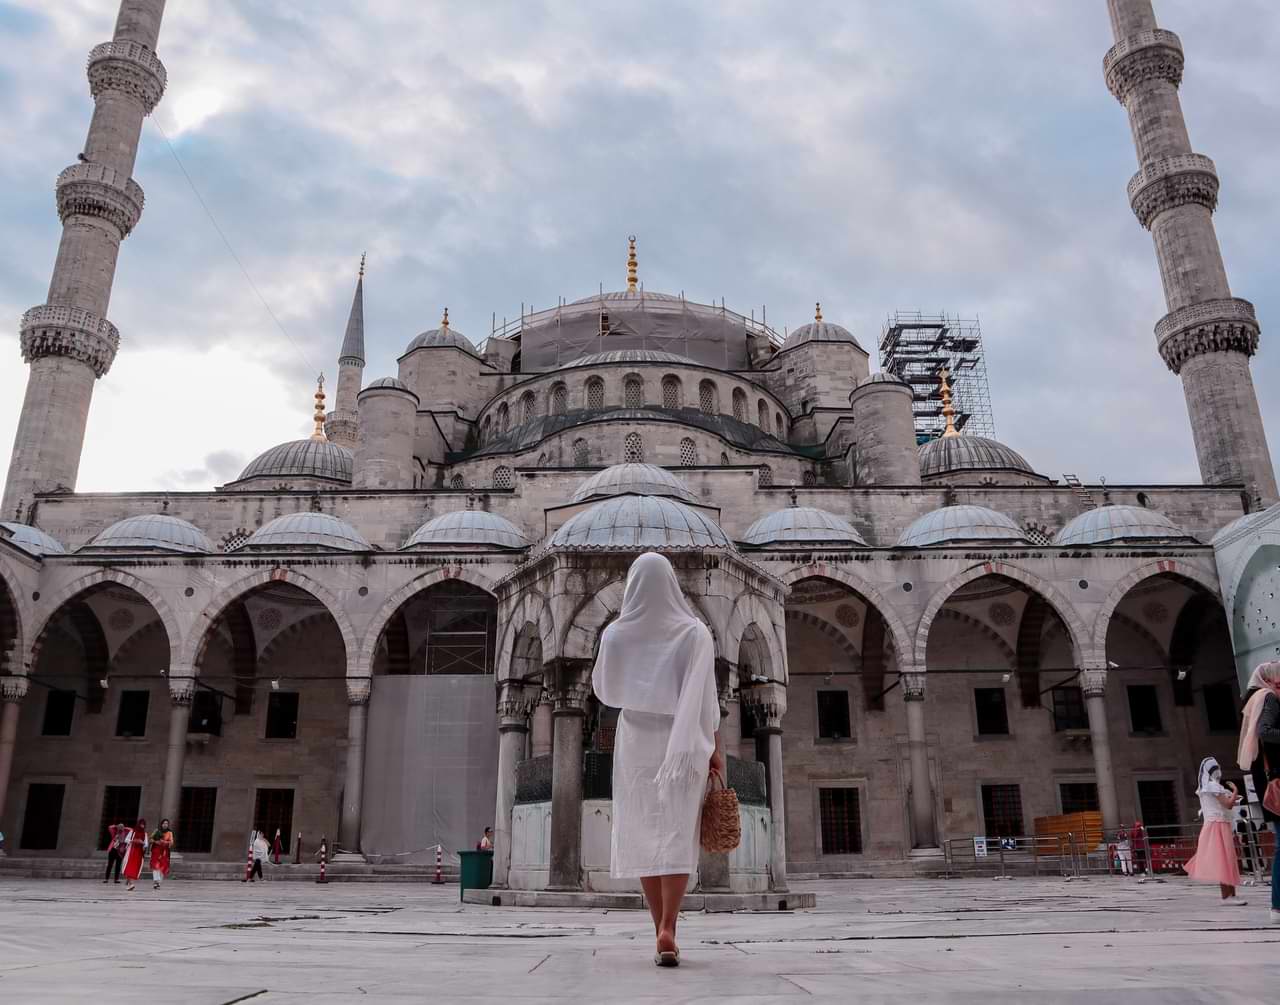 women in the sultanahmed to visit blue mosque